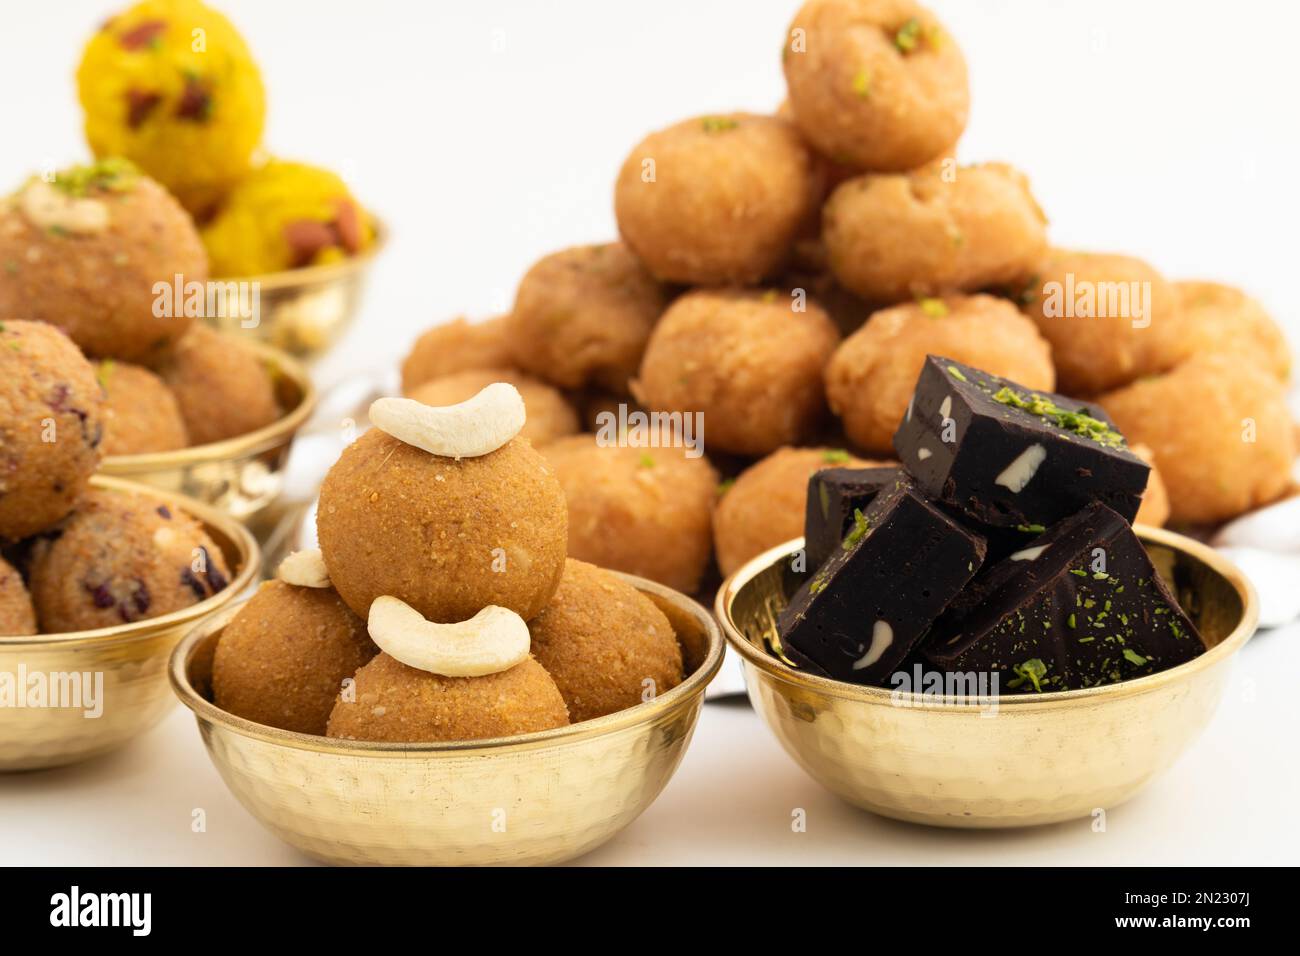 Traditional Ball Shaped Indian Mithai Besan Ke Laddu, Ladoo Or Laddoo Made from Bengal Gram Flour, Chickpeas, Dry Fruits, Nuts And Roasted In Desi Ghe Stock Photo